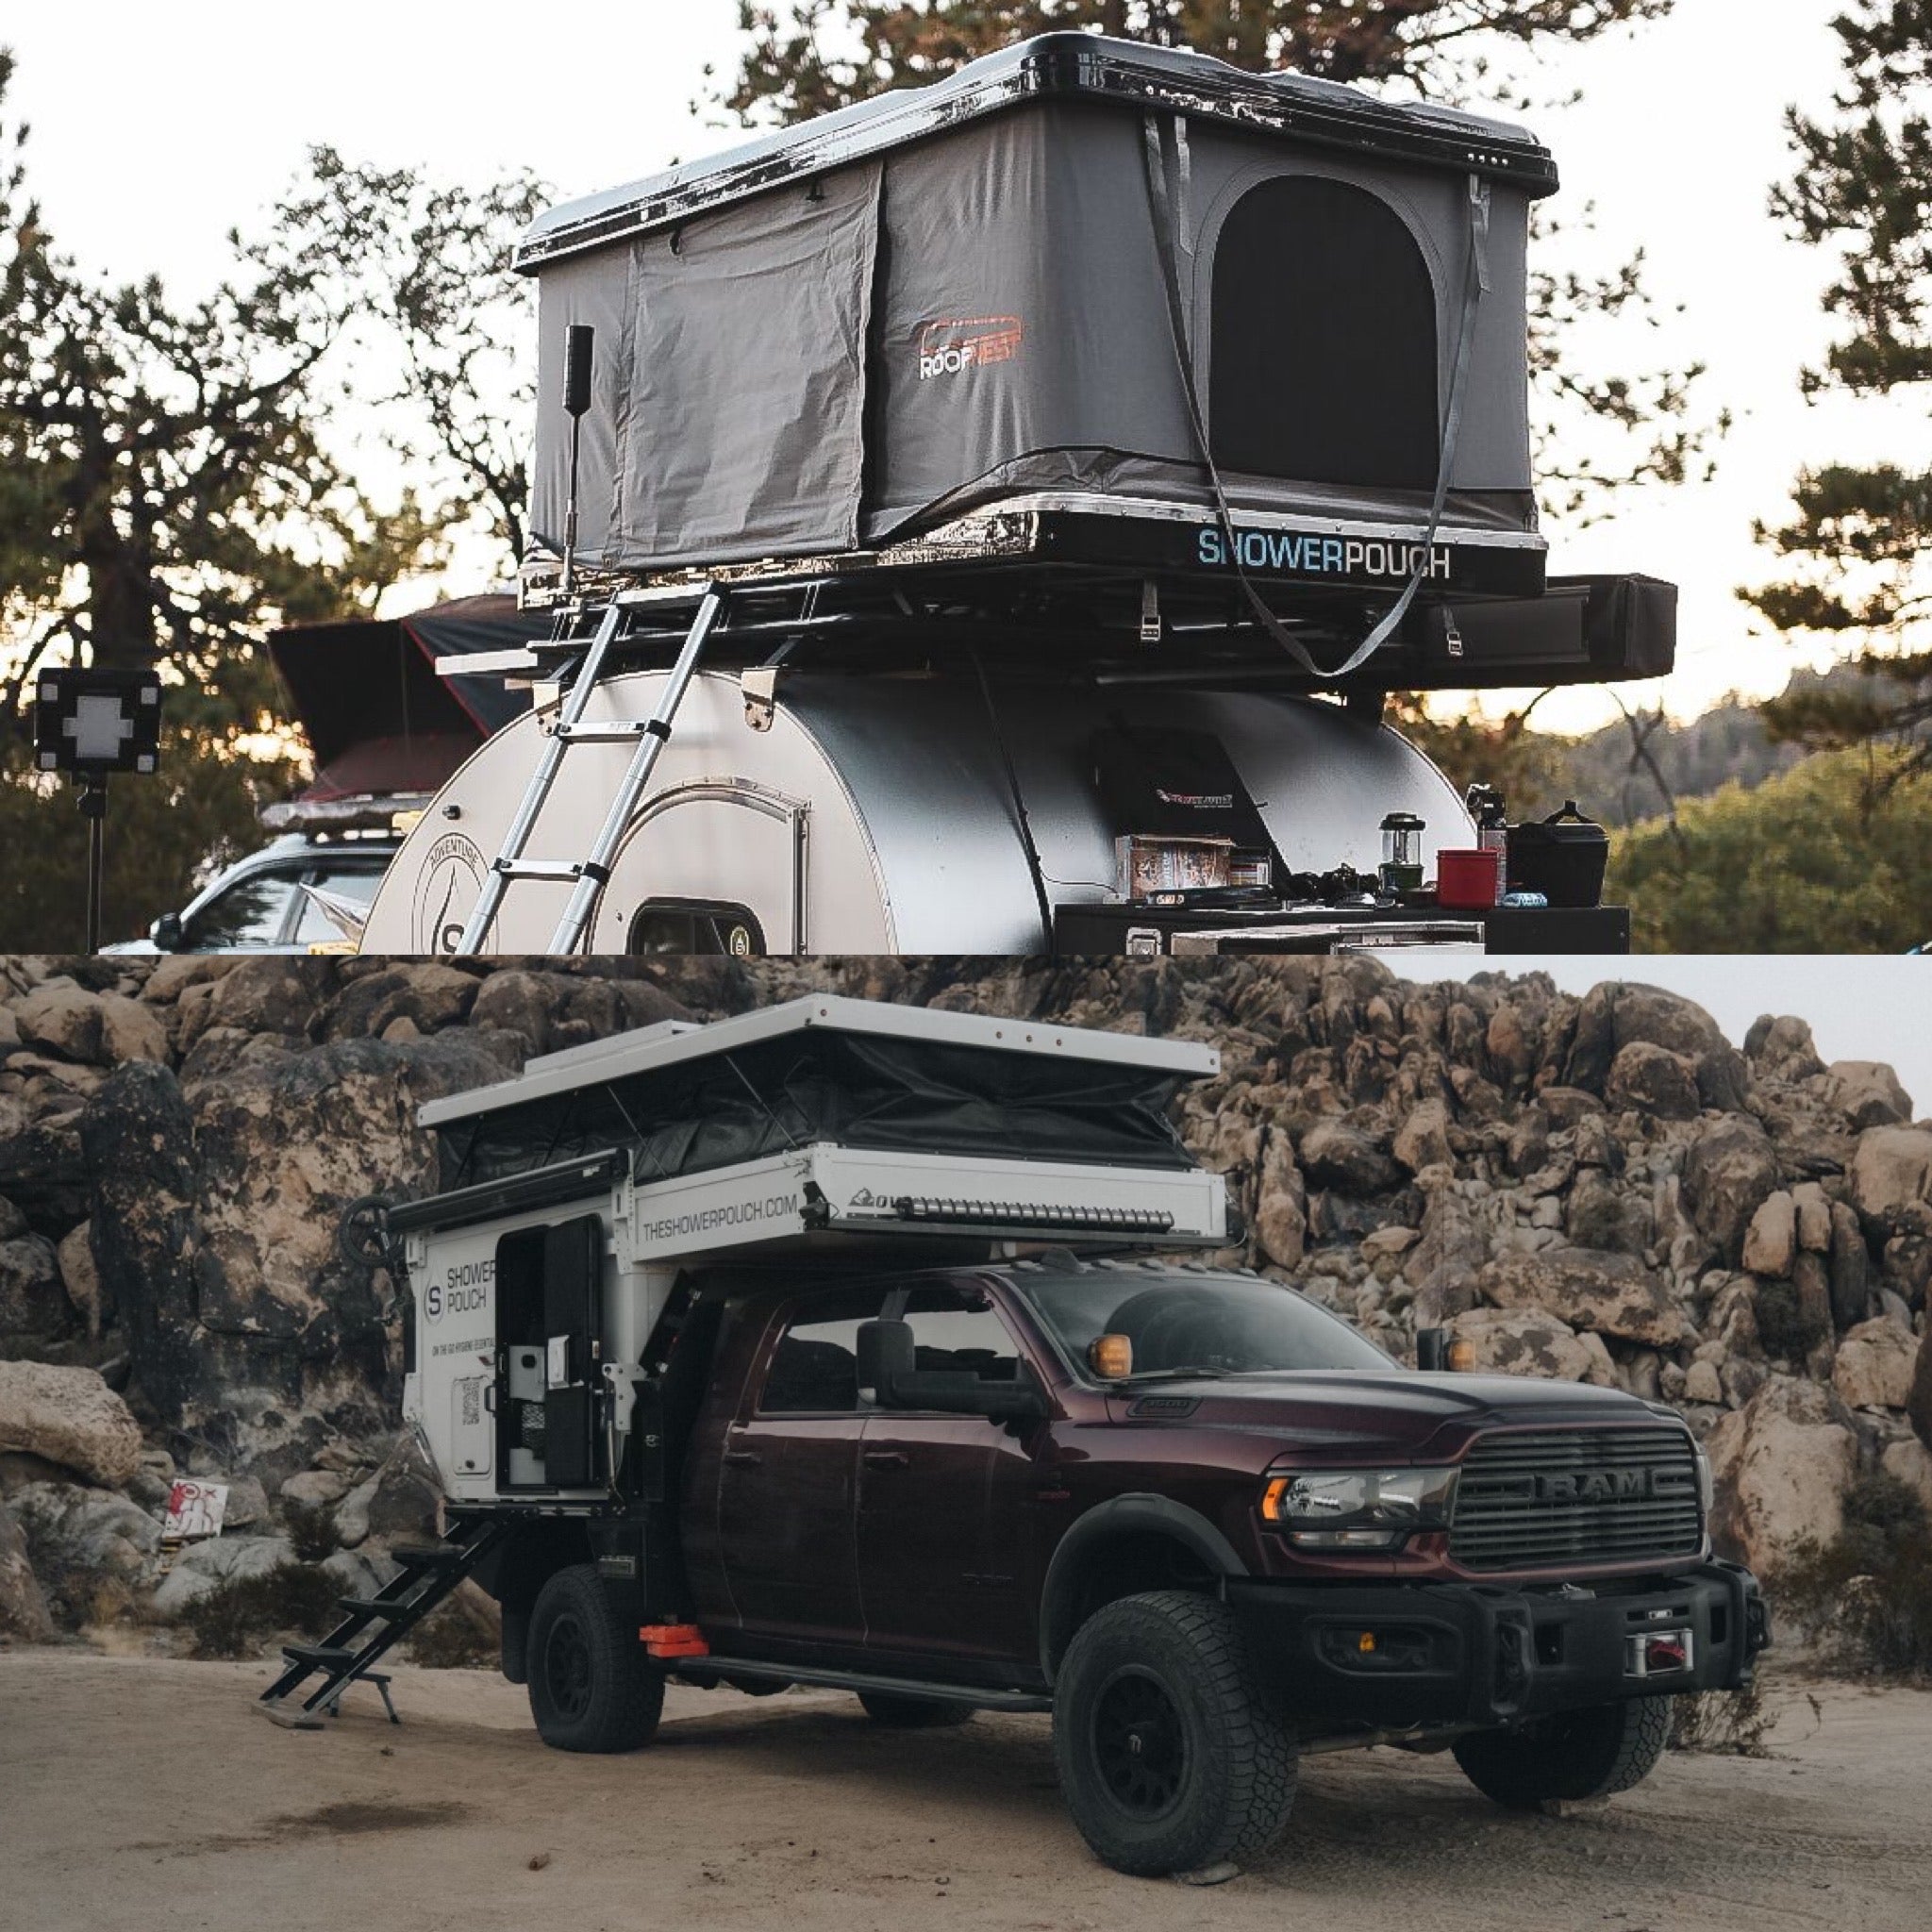 What's better, a Rooftop Tent or a Truck Camper?